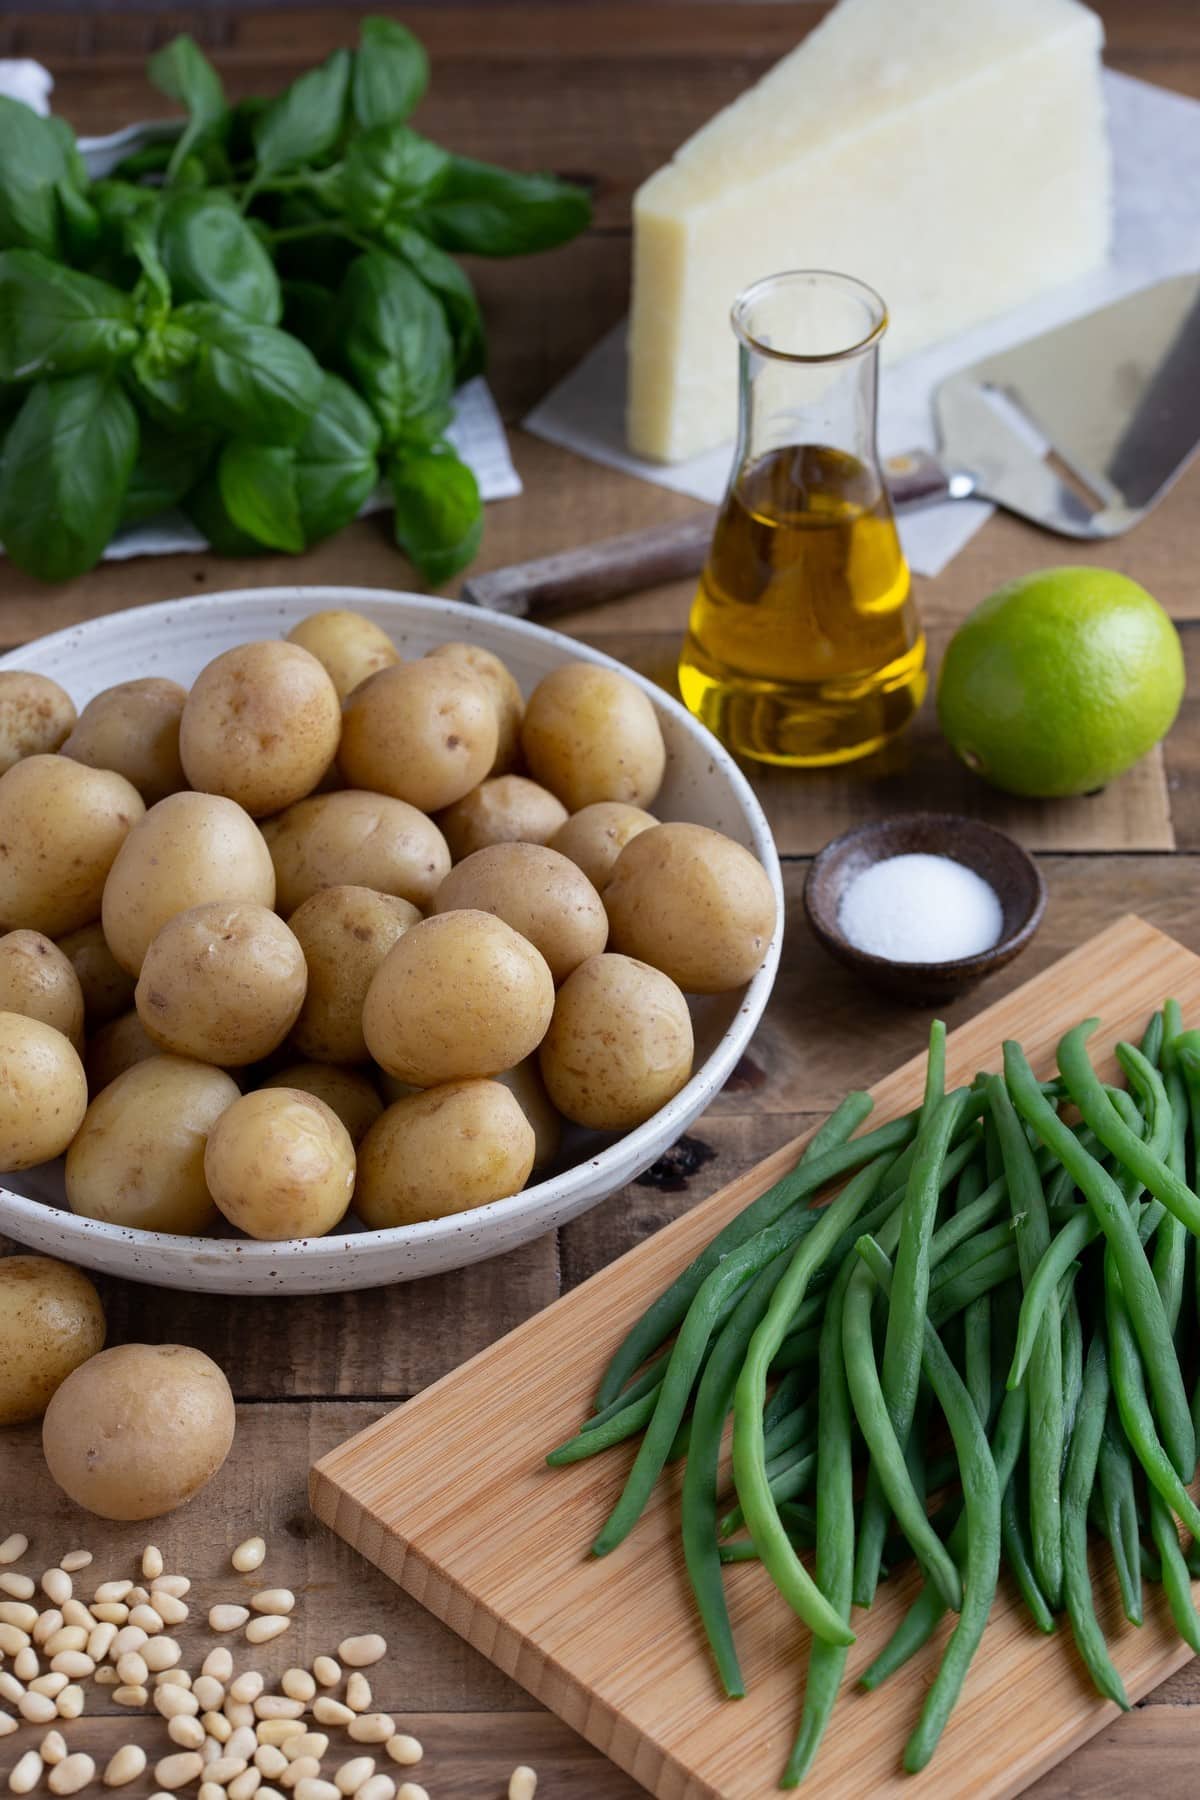 Baby potatoes with green beans and other ingredients needed for the recipe.